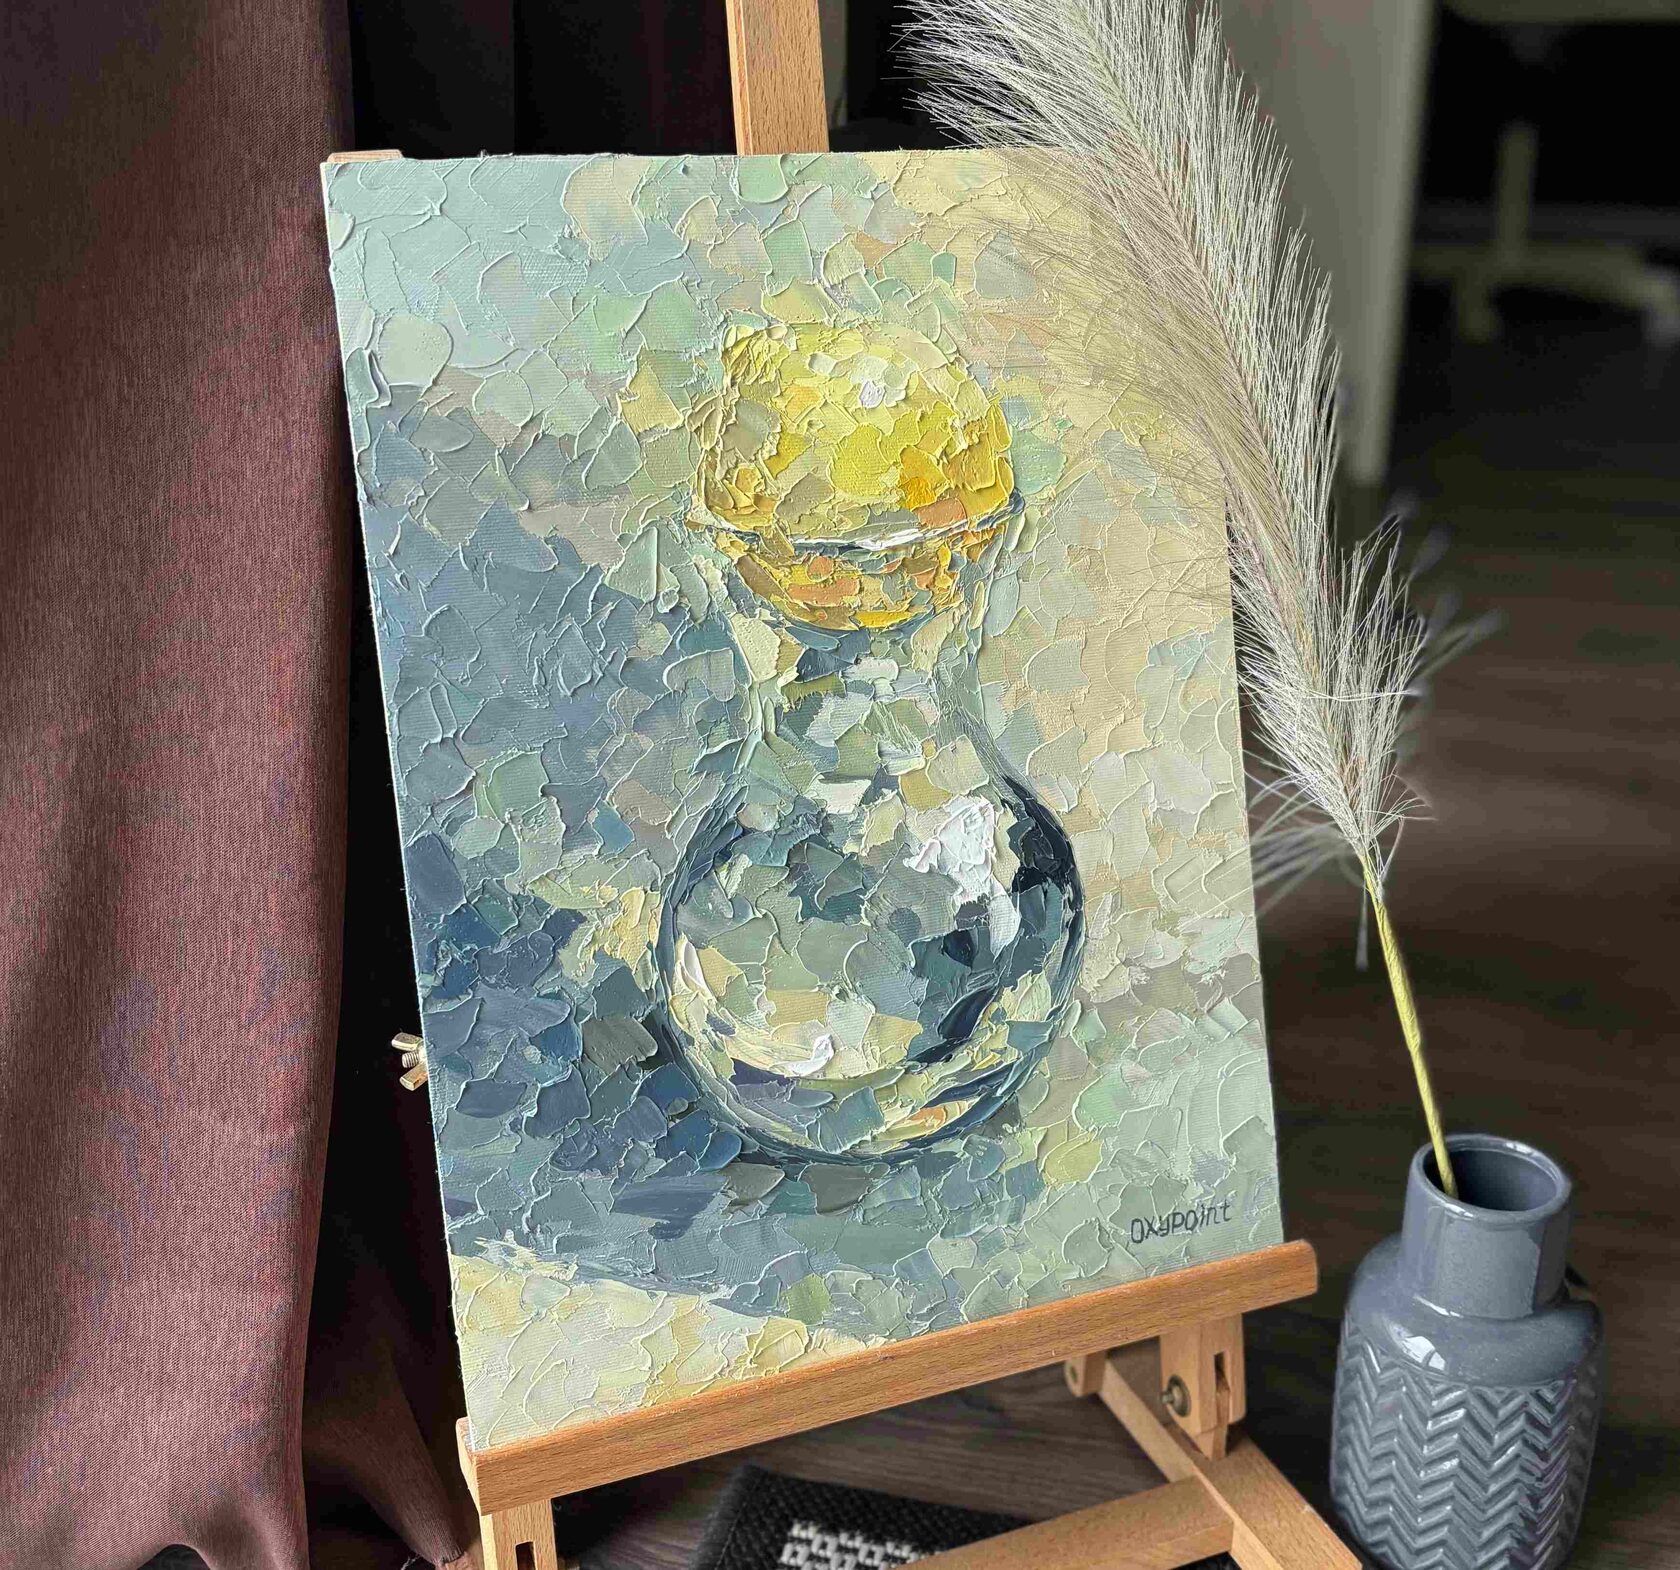 lemon oil painting, still life with glass, abstract art, balance painting with a knife, artist OXYPOINT Oxana Kravtsova